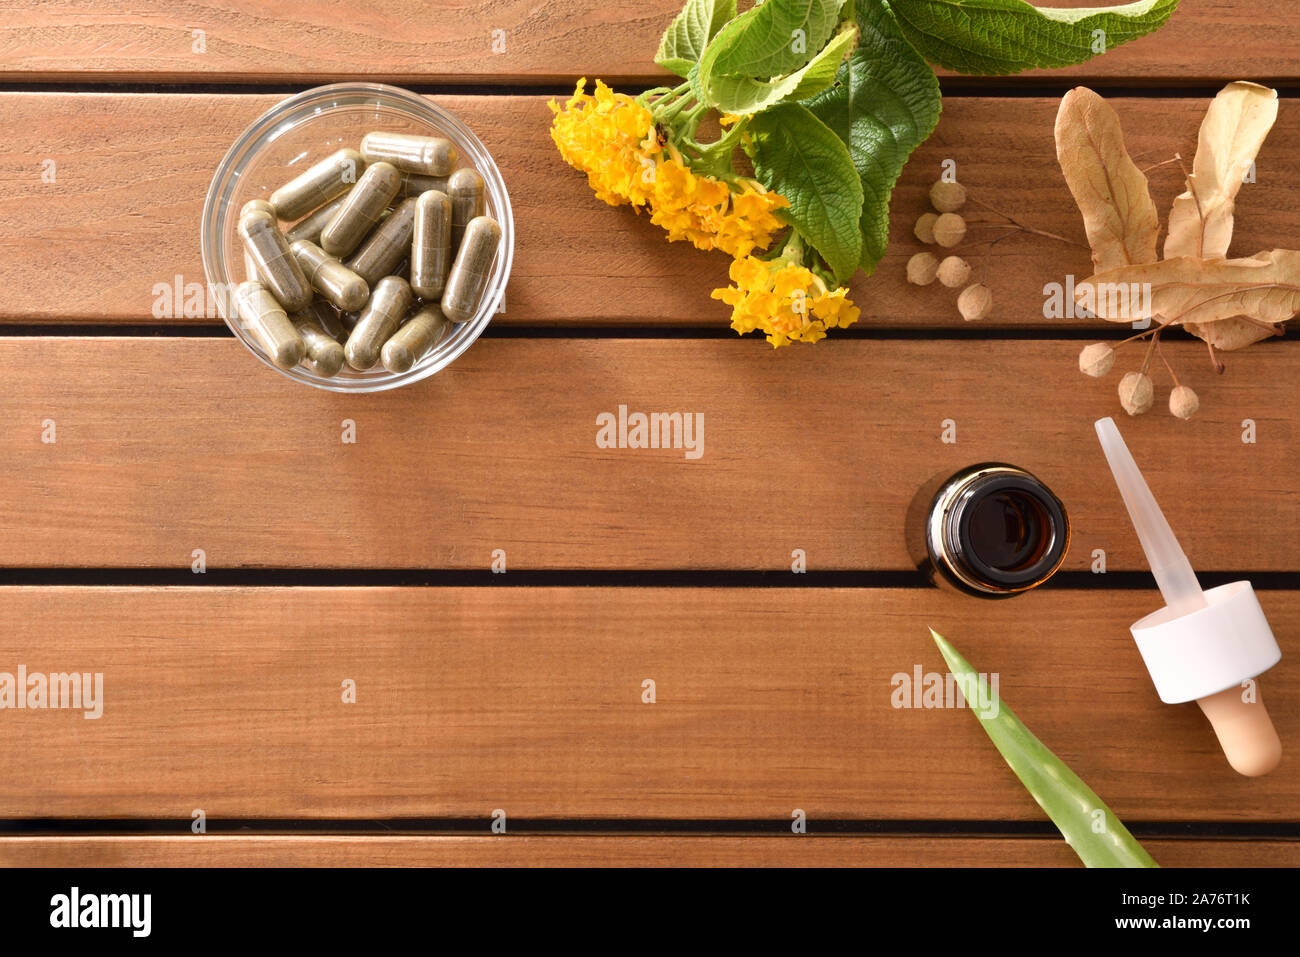 Natural medicine capsules of herbs on wooden table with glass container with plant capsules and dropper bottle with medicinal liquid. Alternative natu Stock Photo